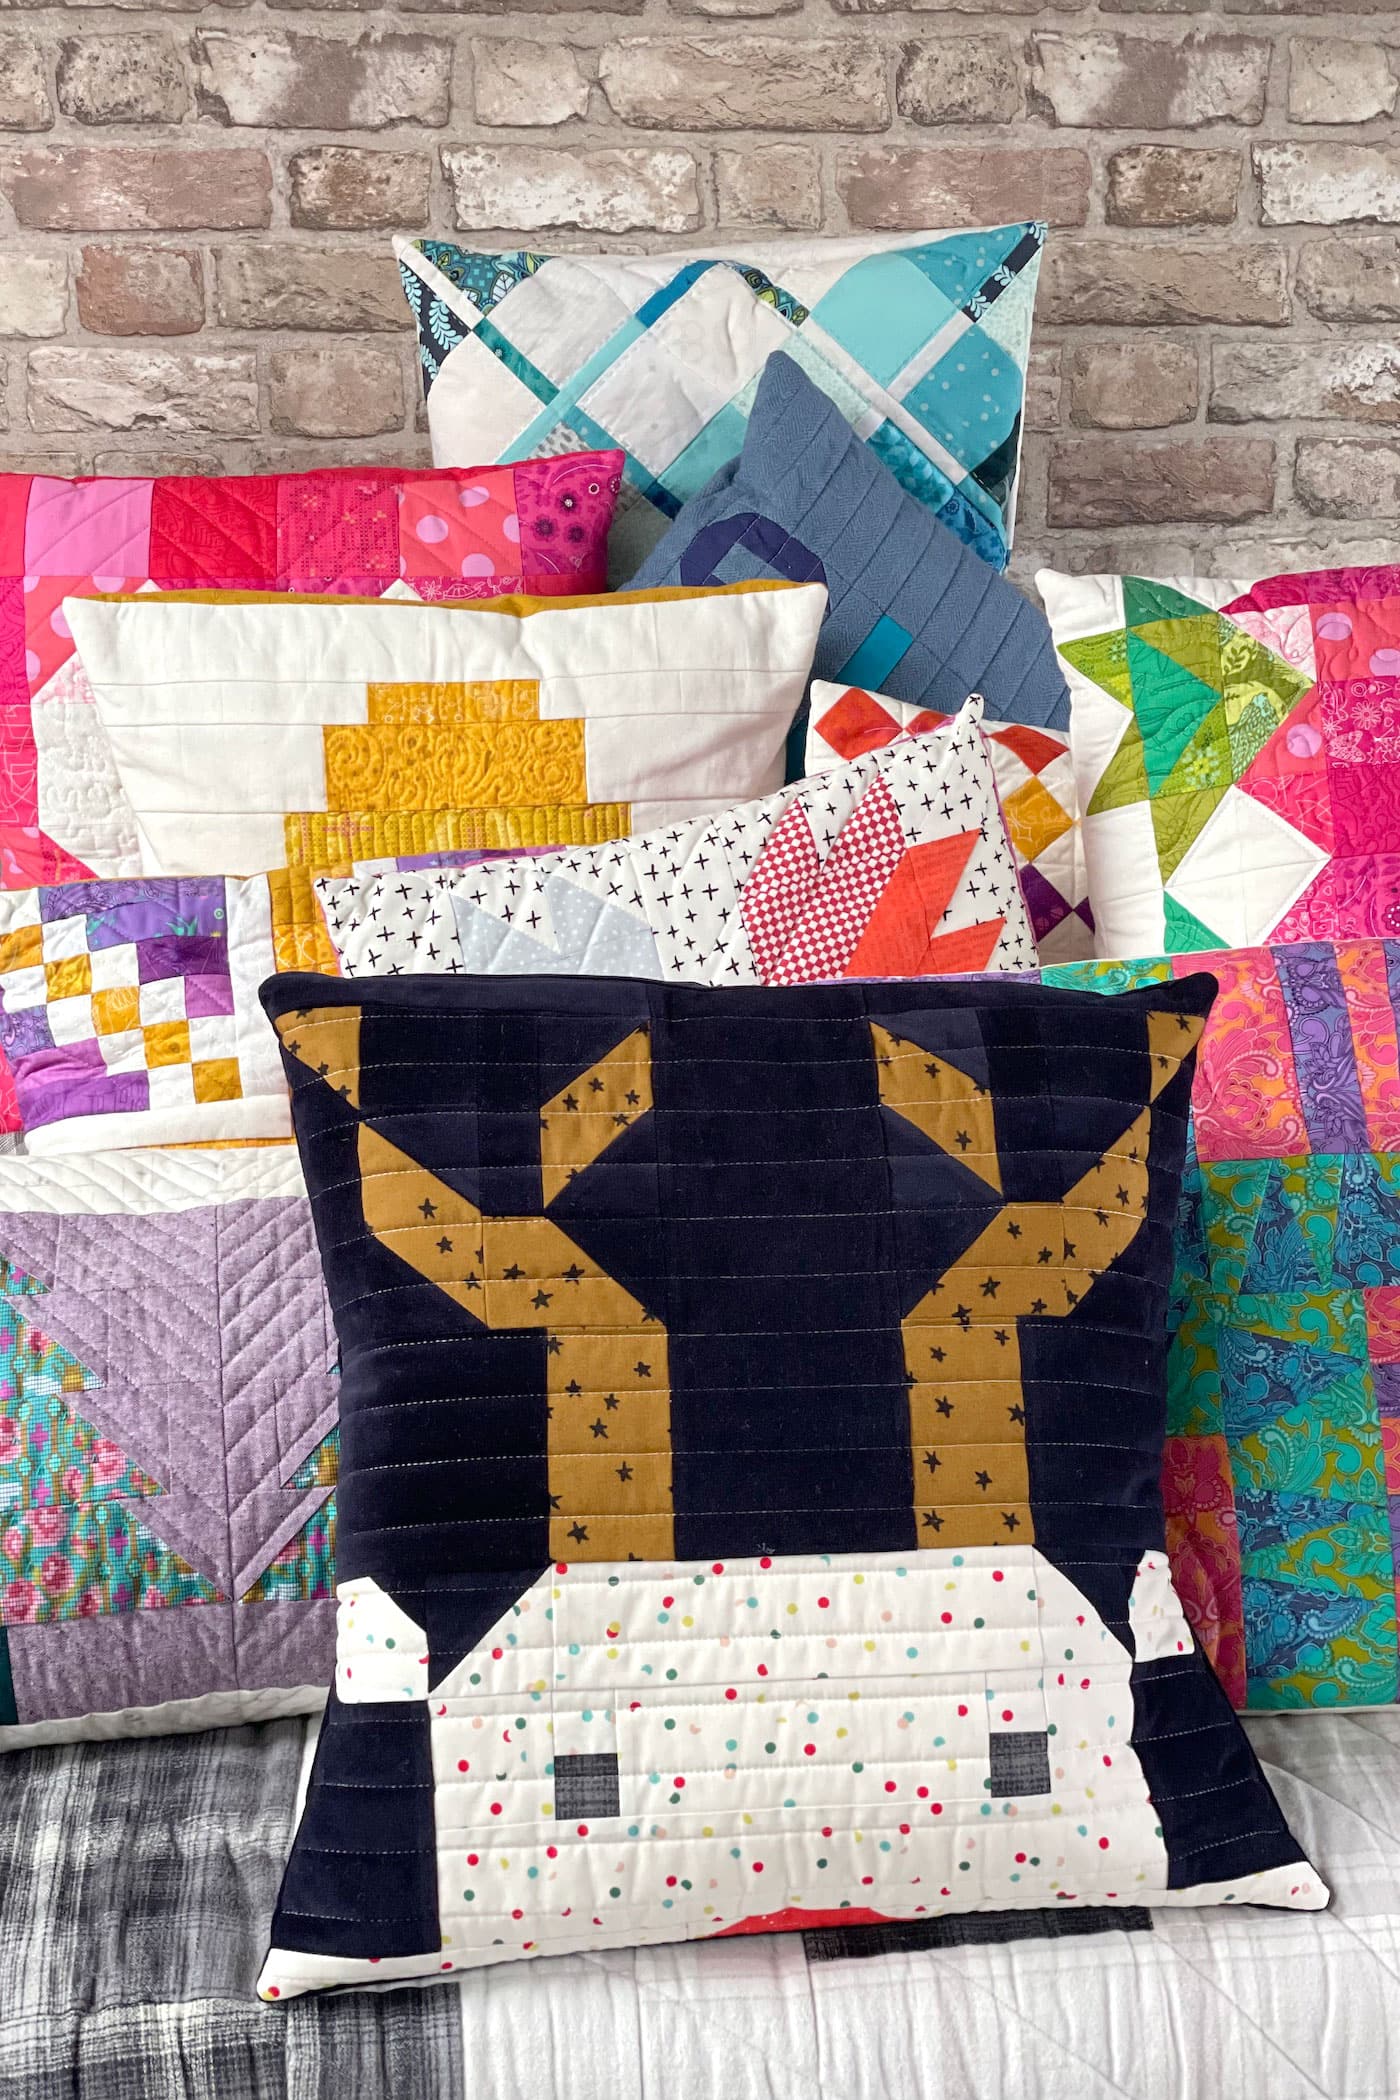 stack of colorful quilted pillows